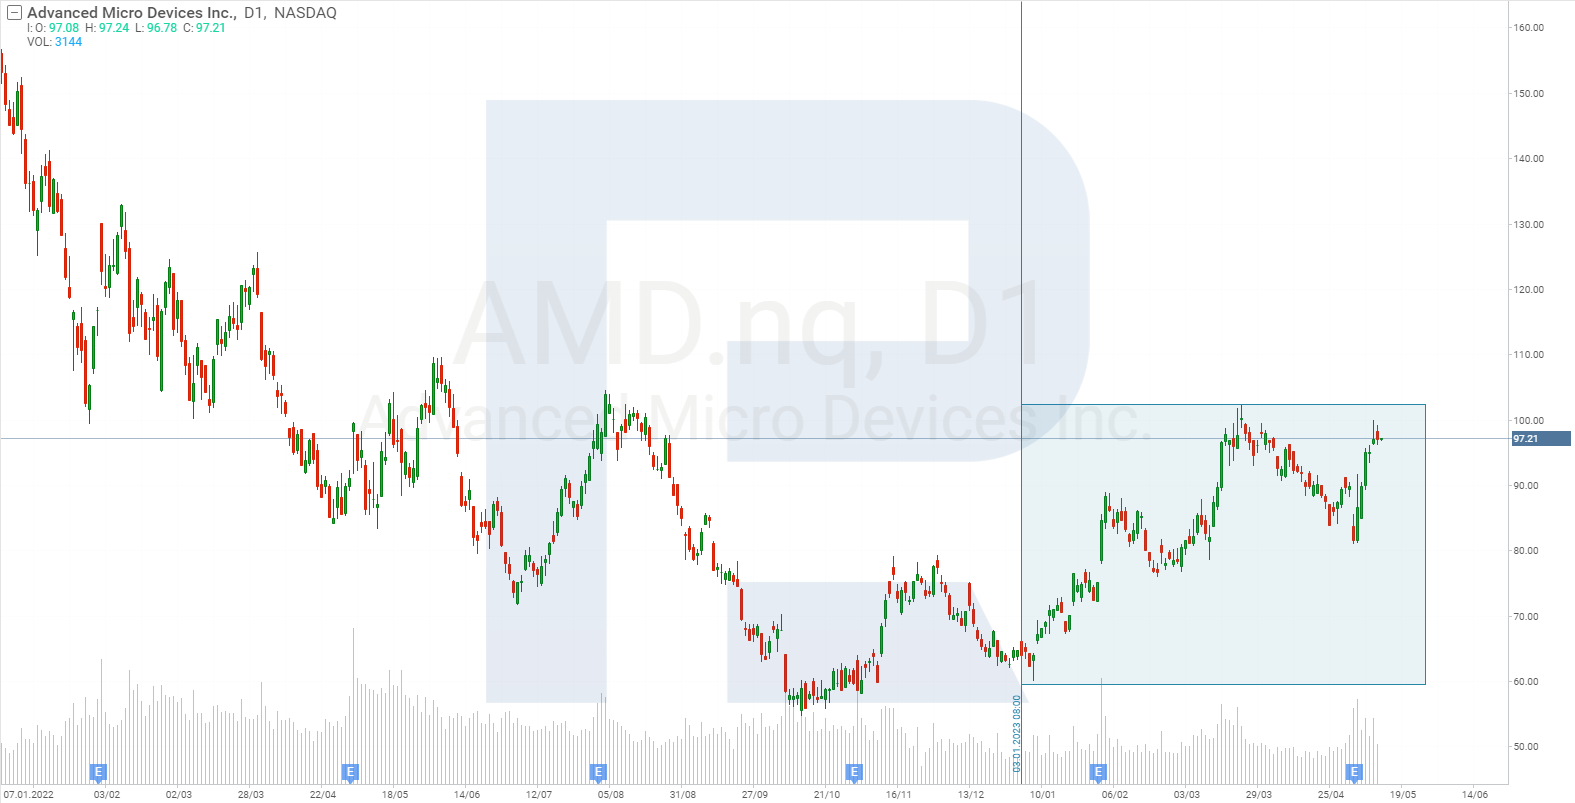 Stock chart of Advanced Micro Devices Inc.